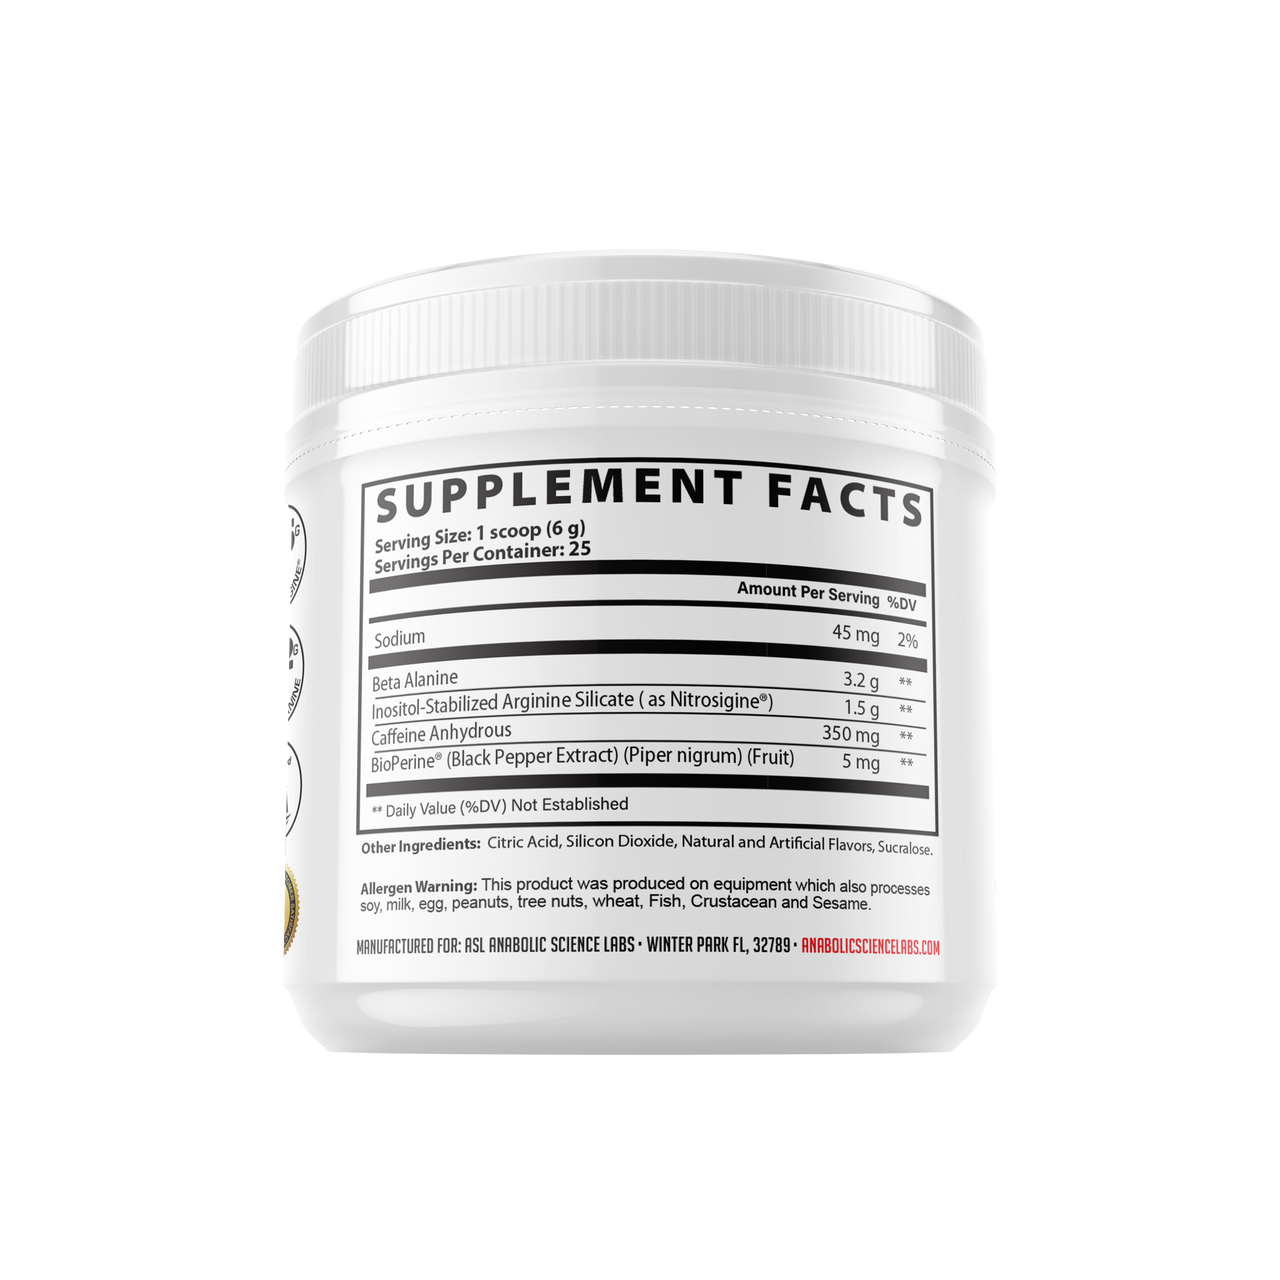 Anabolic Science Labs PR6 Bottle Supplement Facts